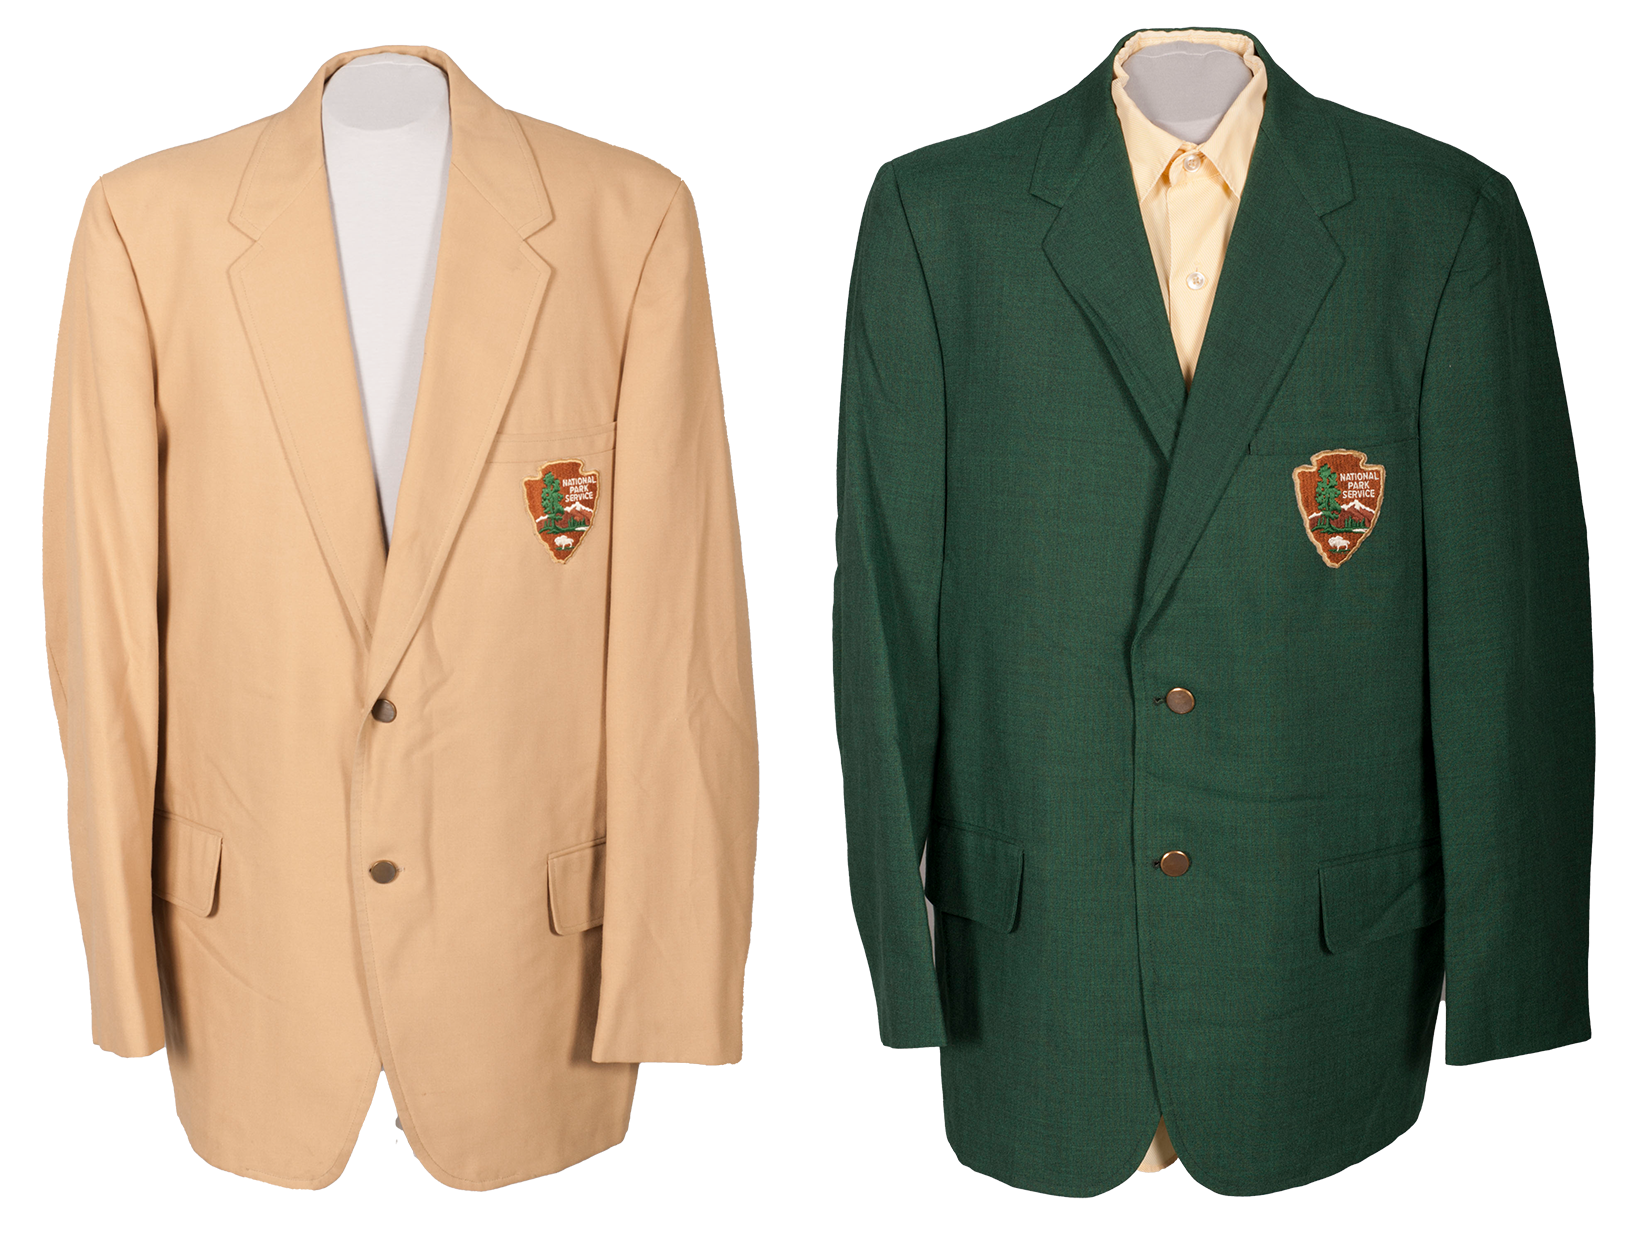 Camel and green blazers on mannequins